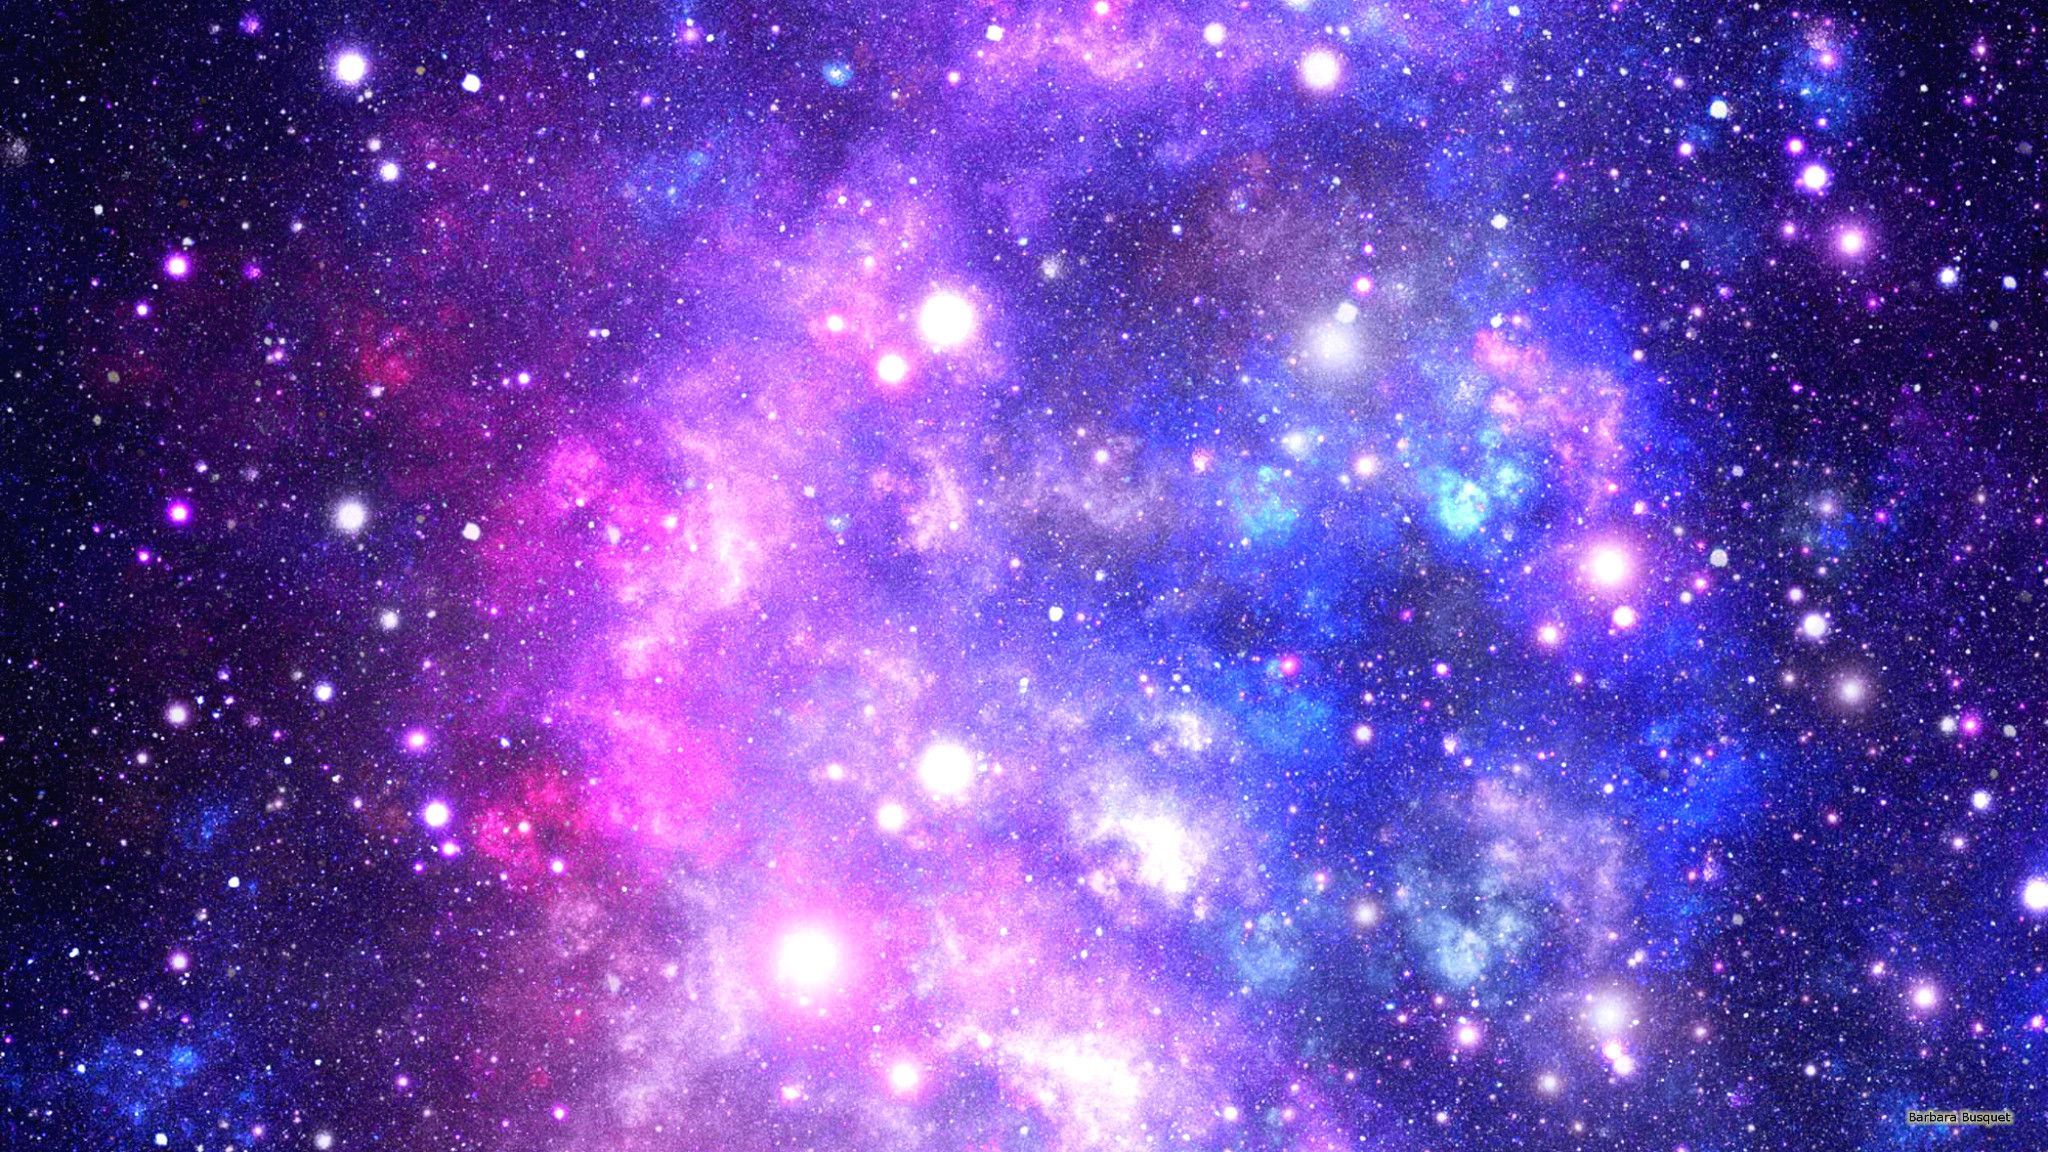 Galaxy wallpaper with colors and stars 2048x1152. Papéis de